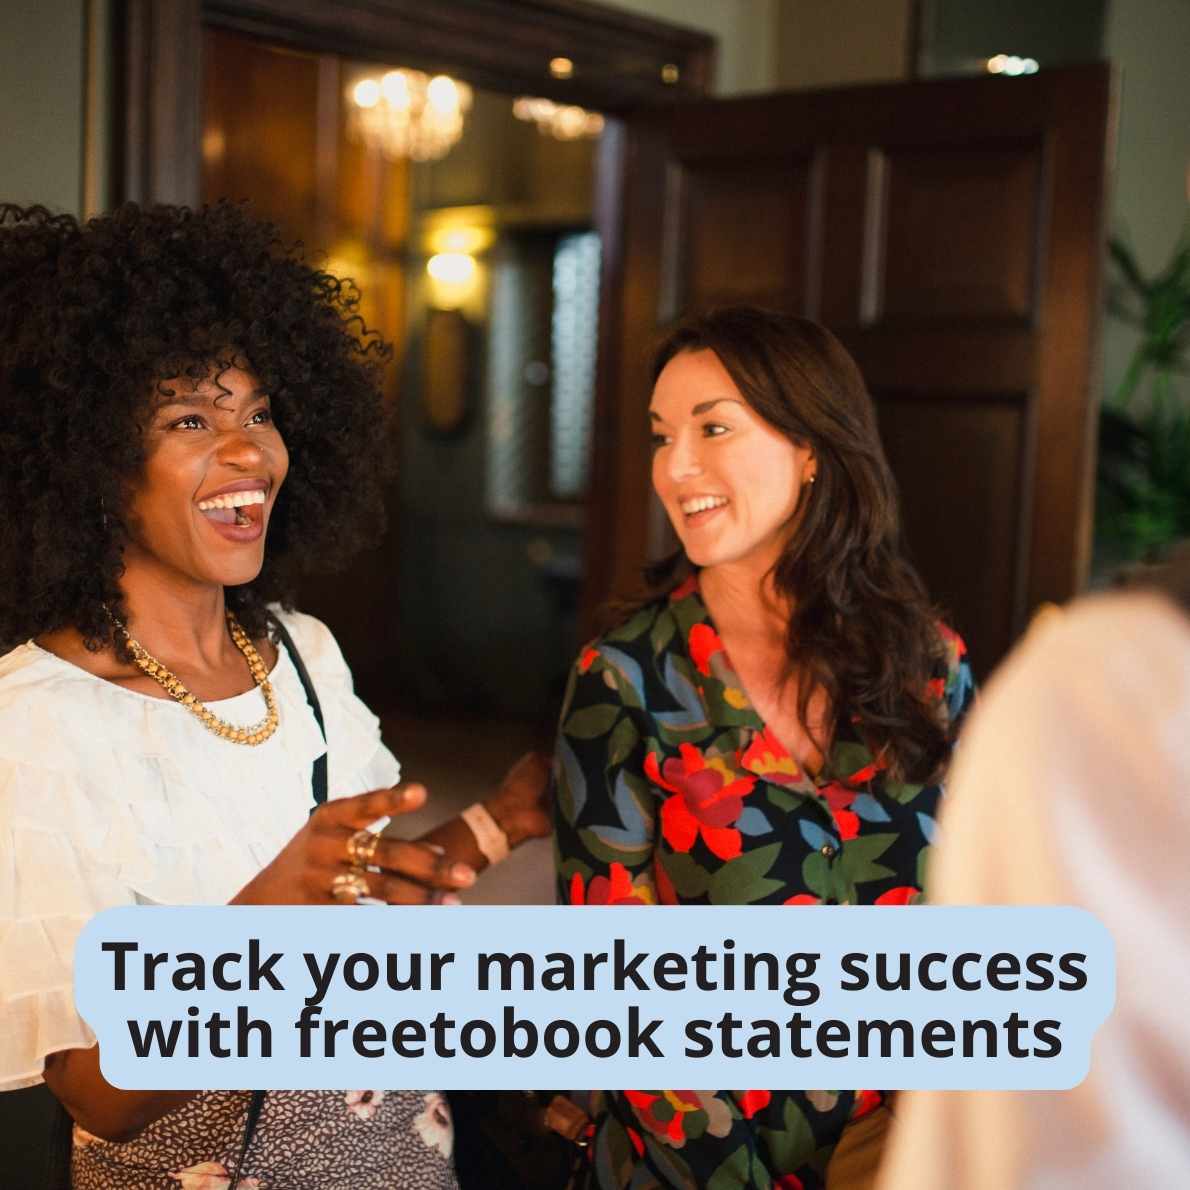 Track your marketing success with freetobook